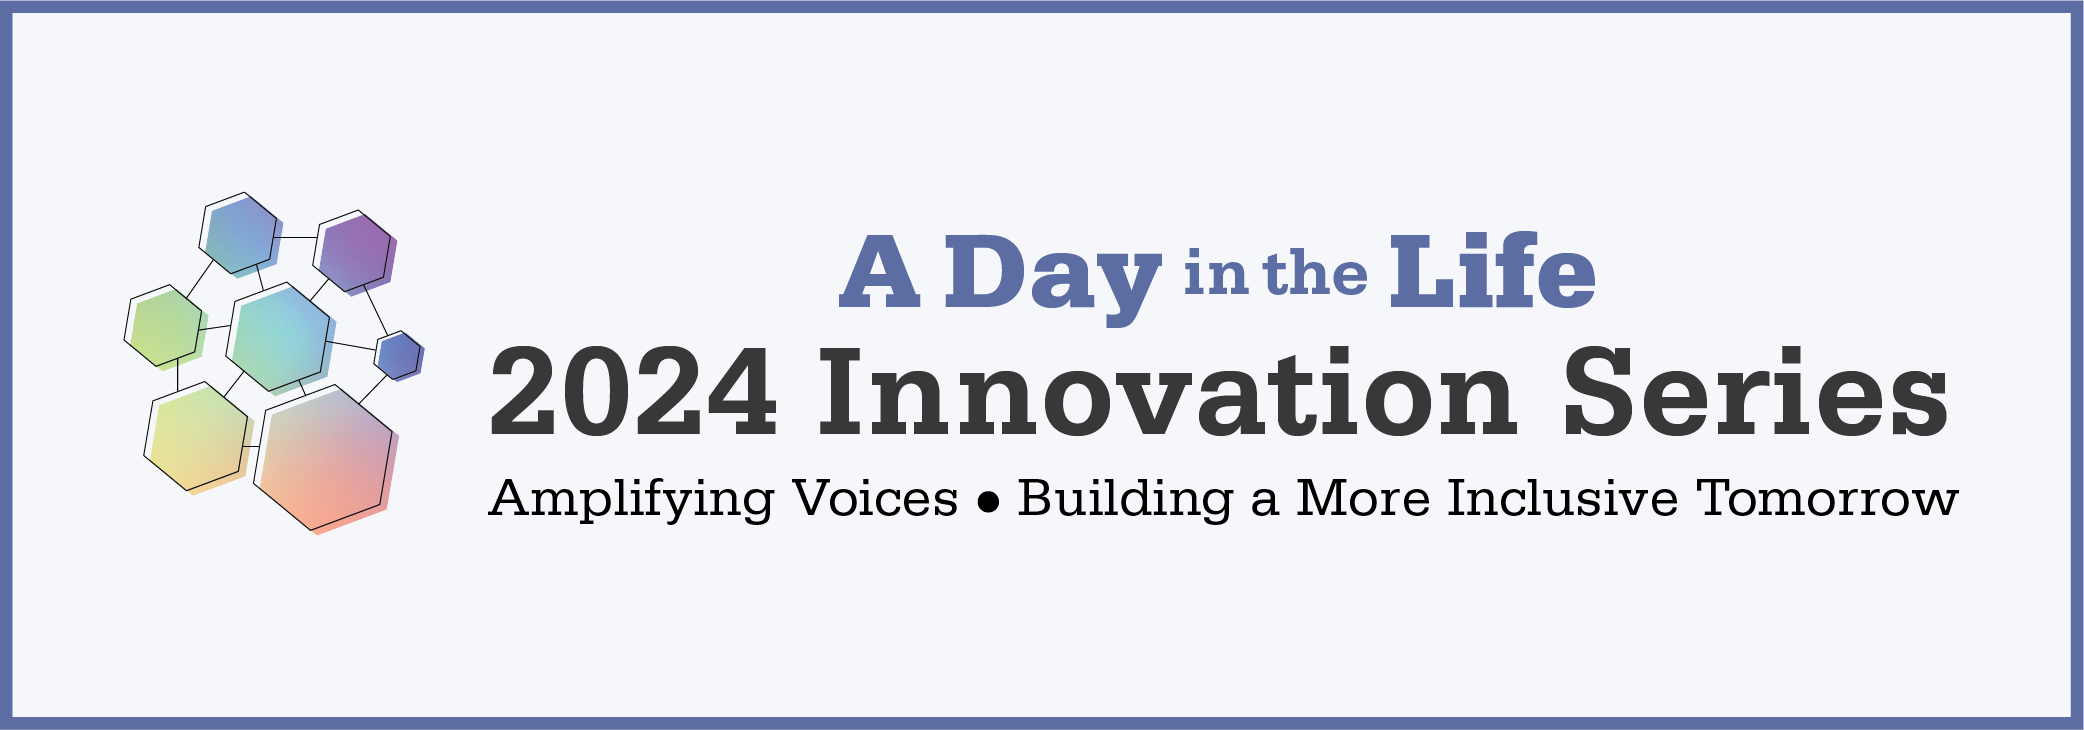 A Day in the Life | 2024 Innovation Series | Amplifying Voices | Building a More Inclusive Tomorrow